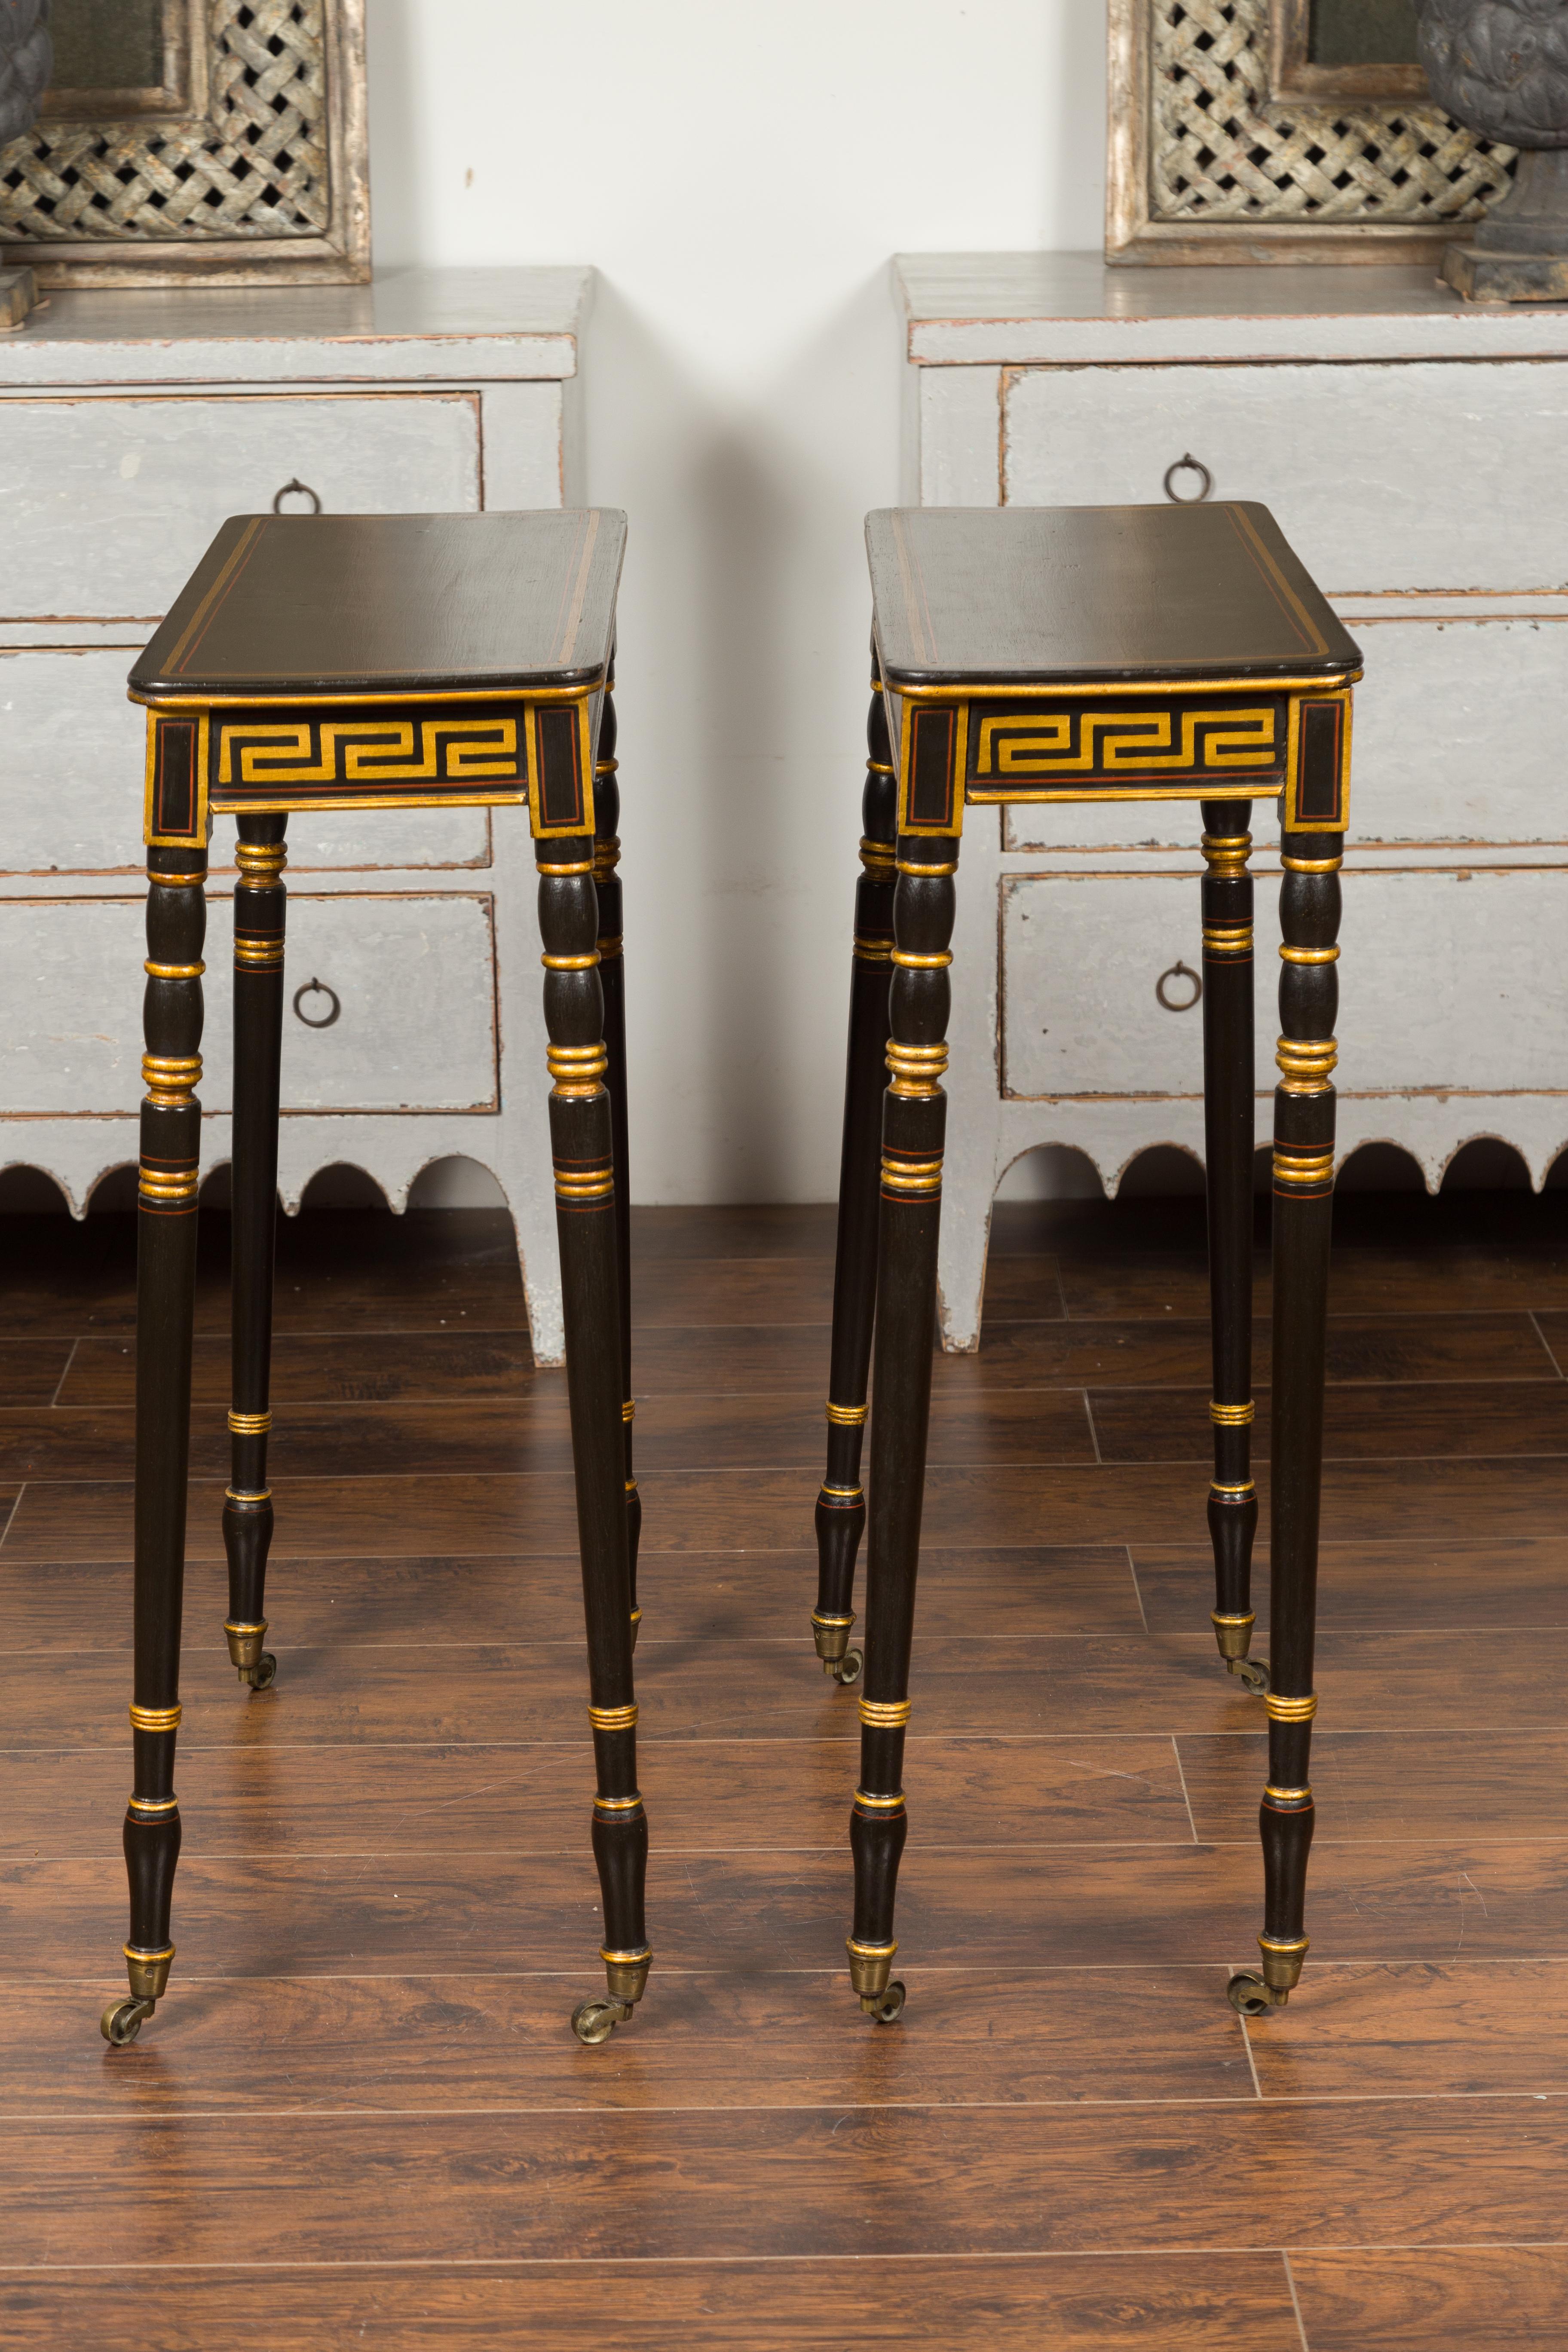 Pair of English Regency Period Ebonized Wood Console Tables with Gilt Greek Key For Sale 12